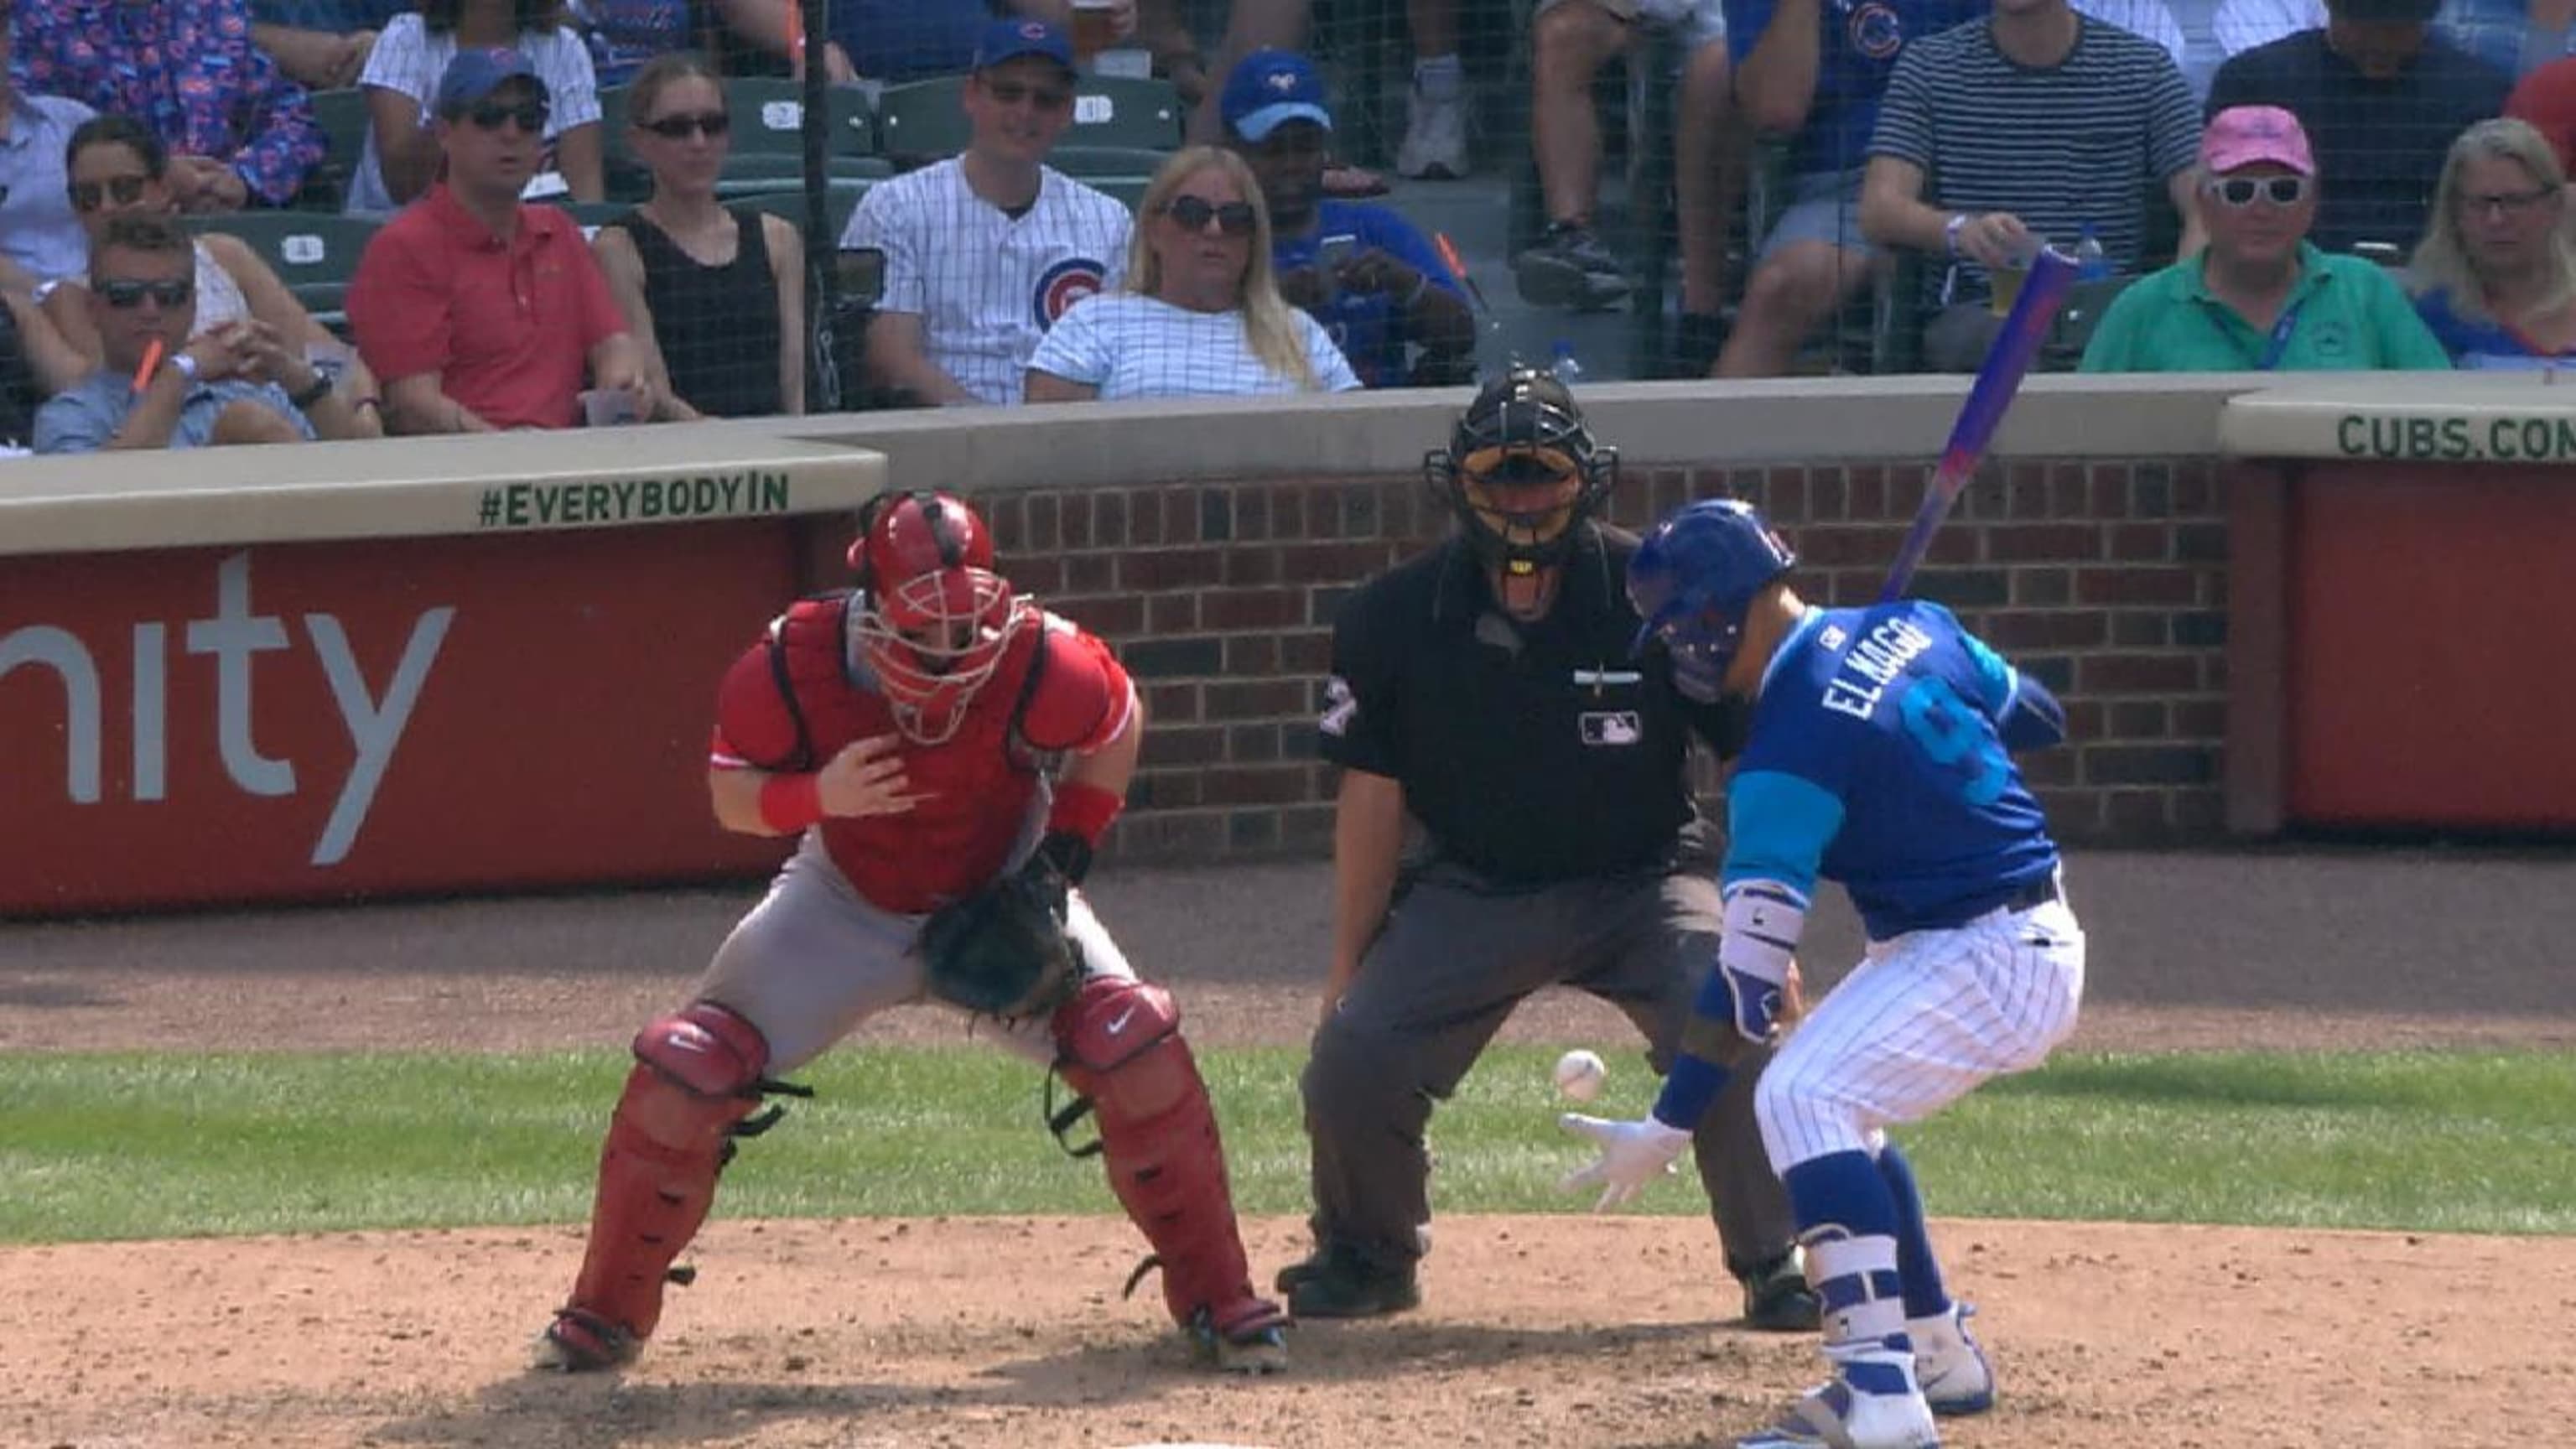 Javier Baez displayed his amazingly fast reflexes on a ball he definitely  shouldn't have touched